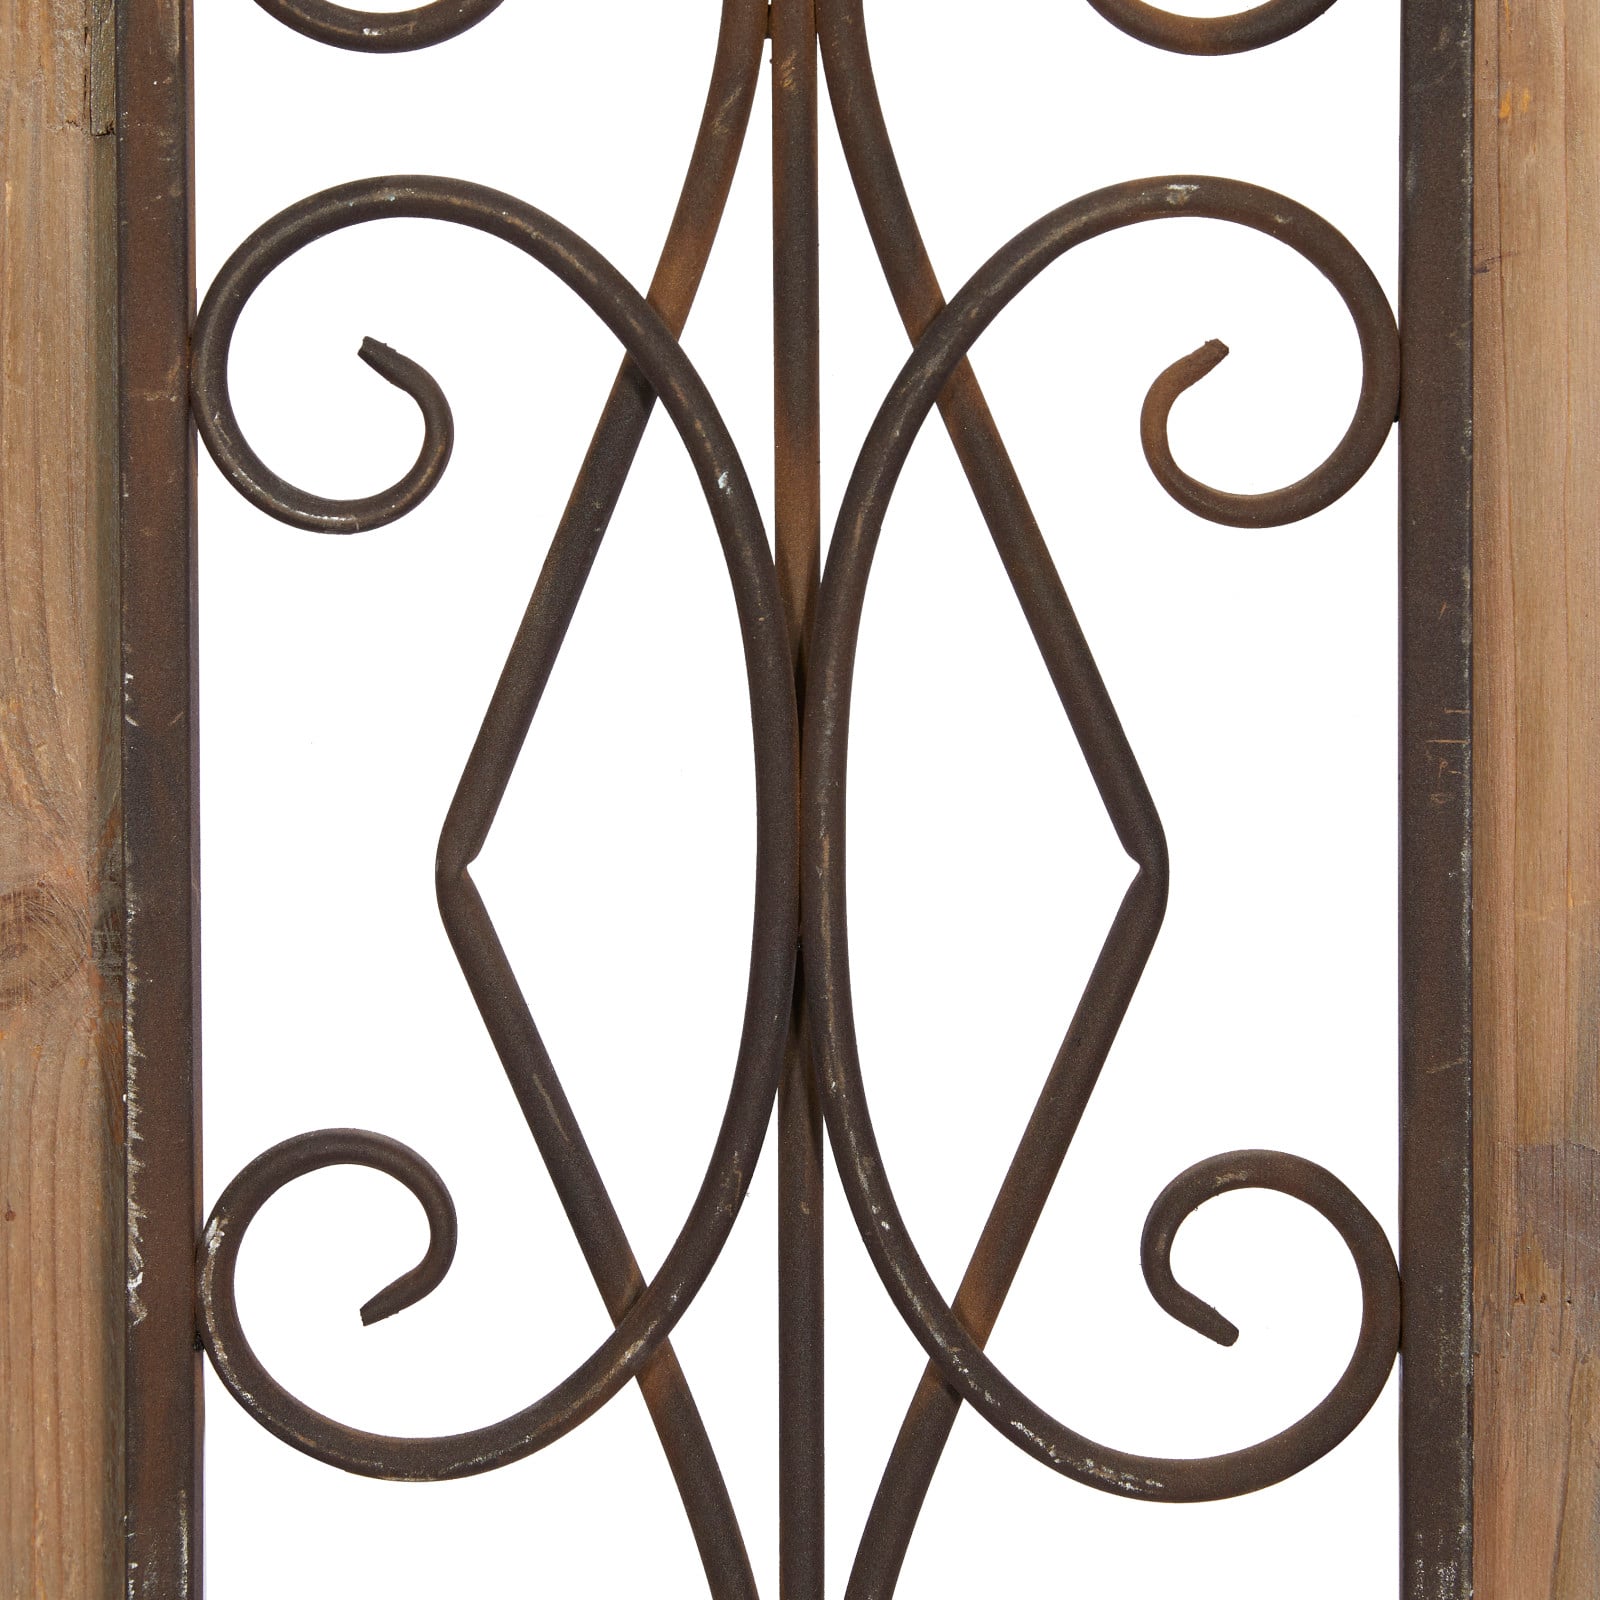 23&#x22; Brown Rustic Metal &#x26; Wood Arched Gate Wall D&#xE9;cor